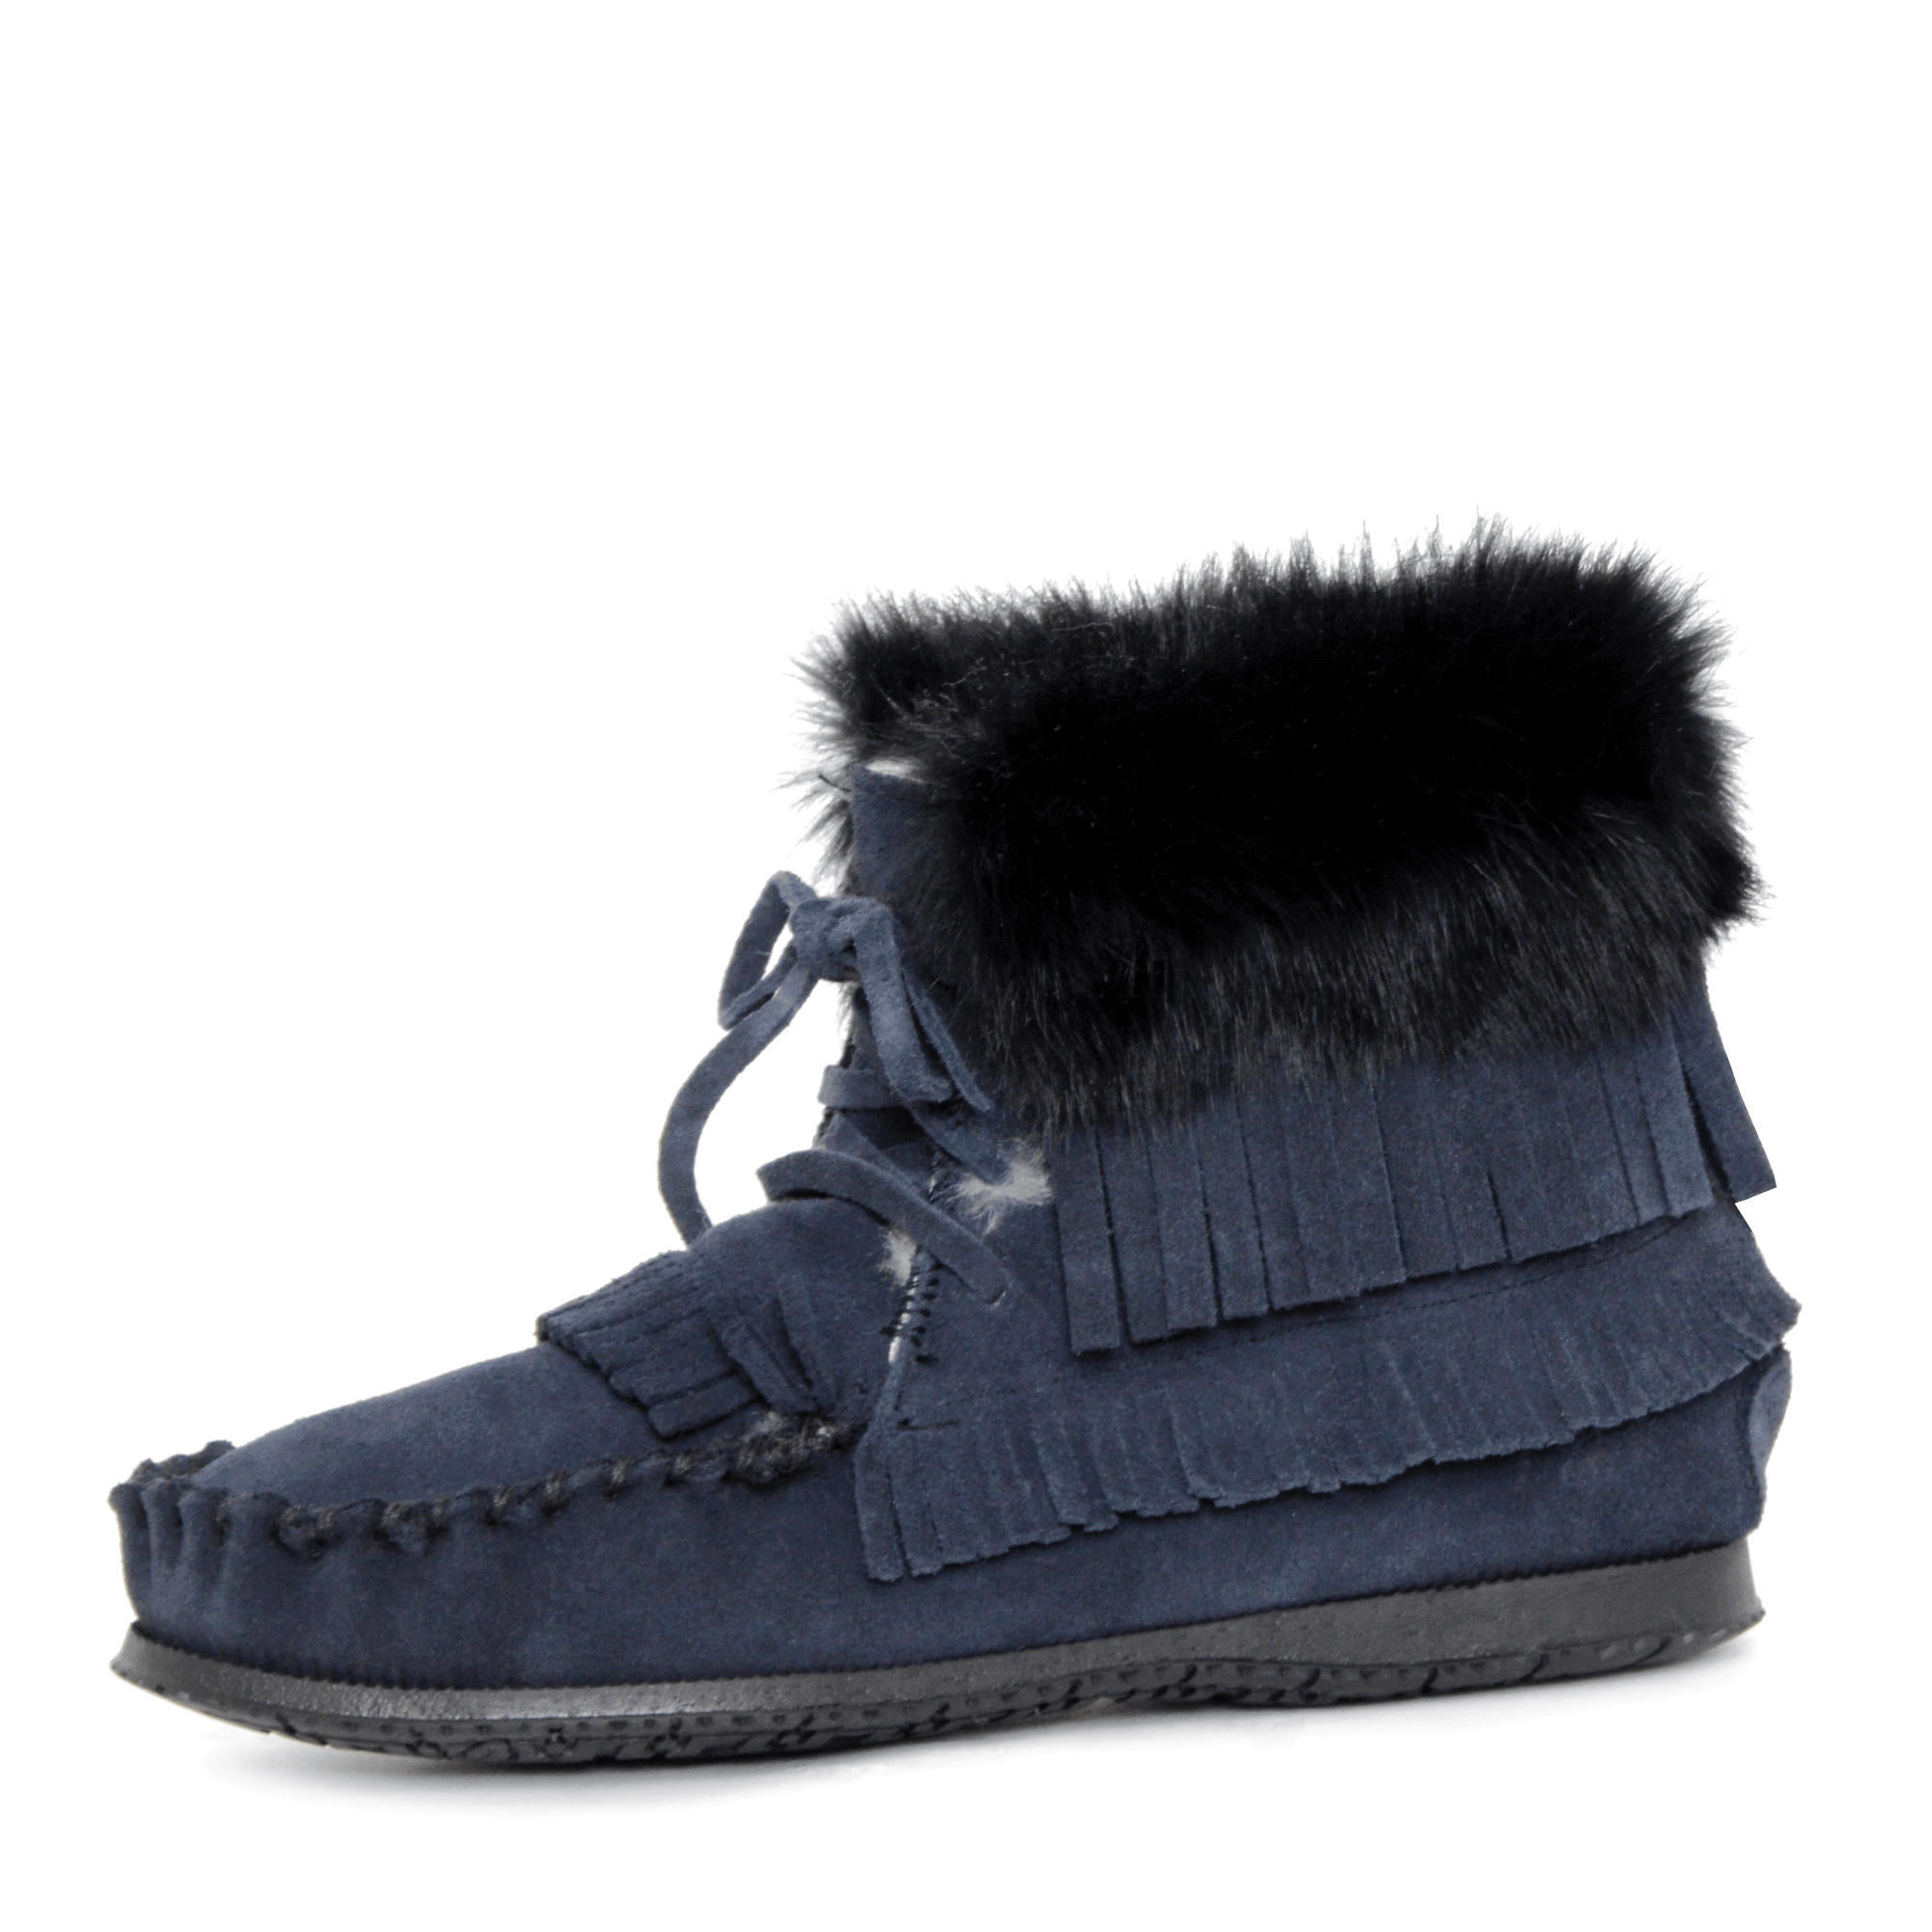 Loo Moccasin for Women - Navy 